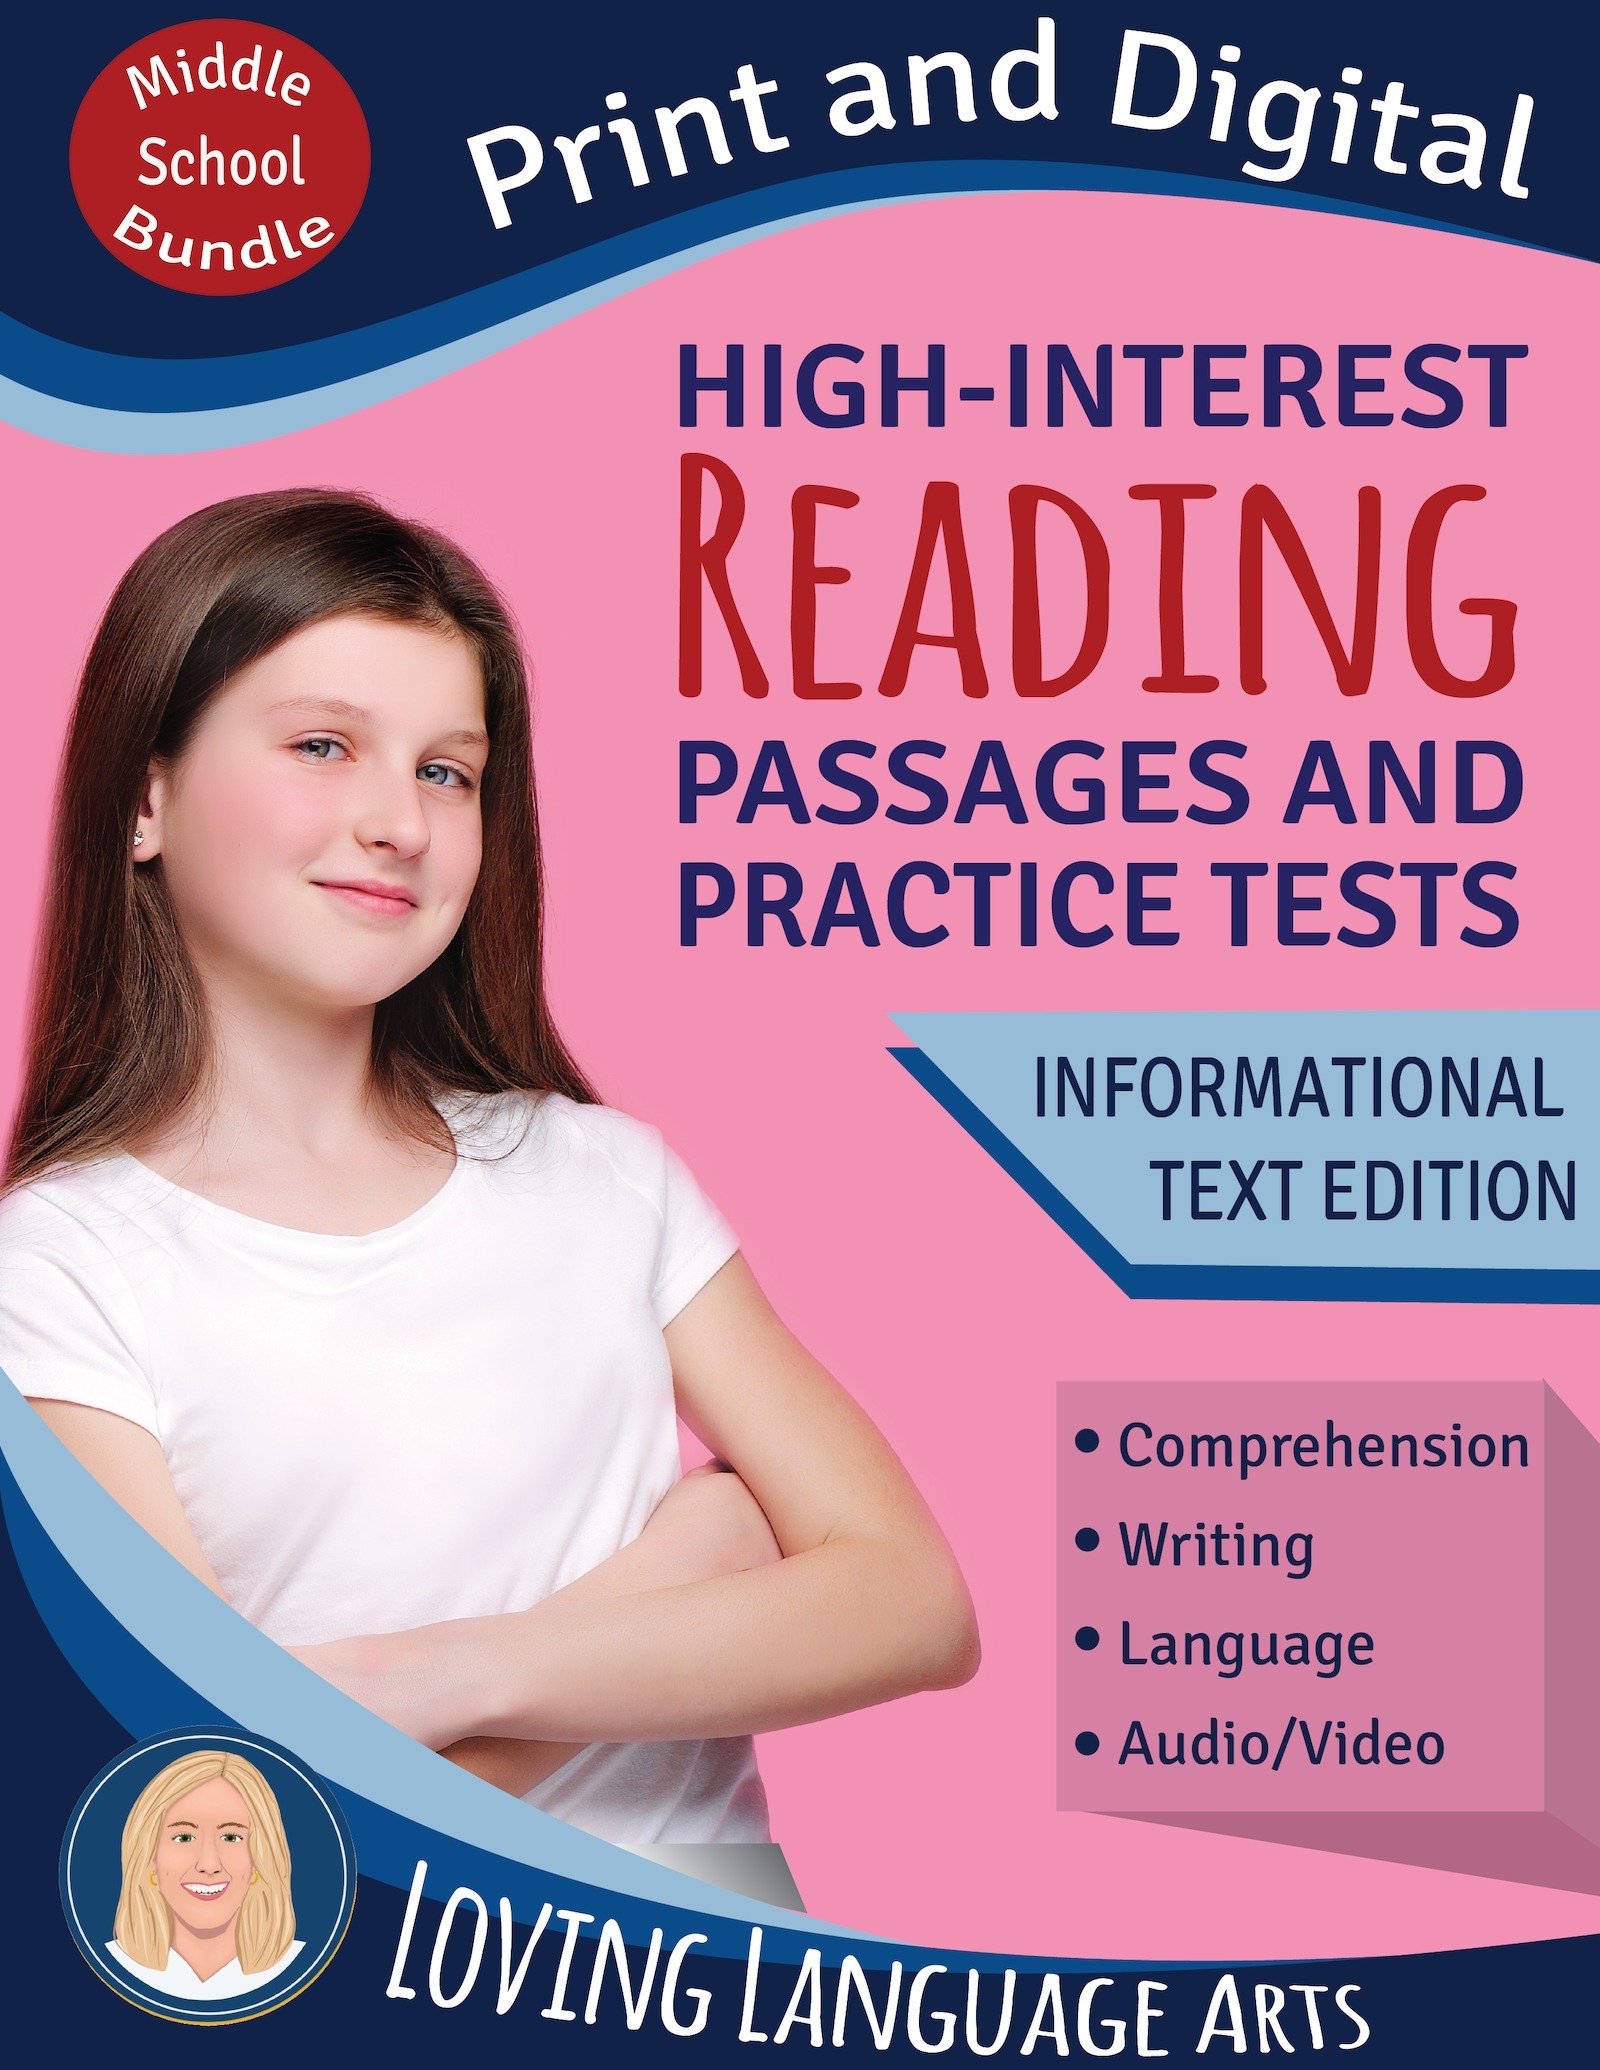 6th-8th grade language arts workbook bundle - High-interest passages and practice tests.